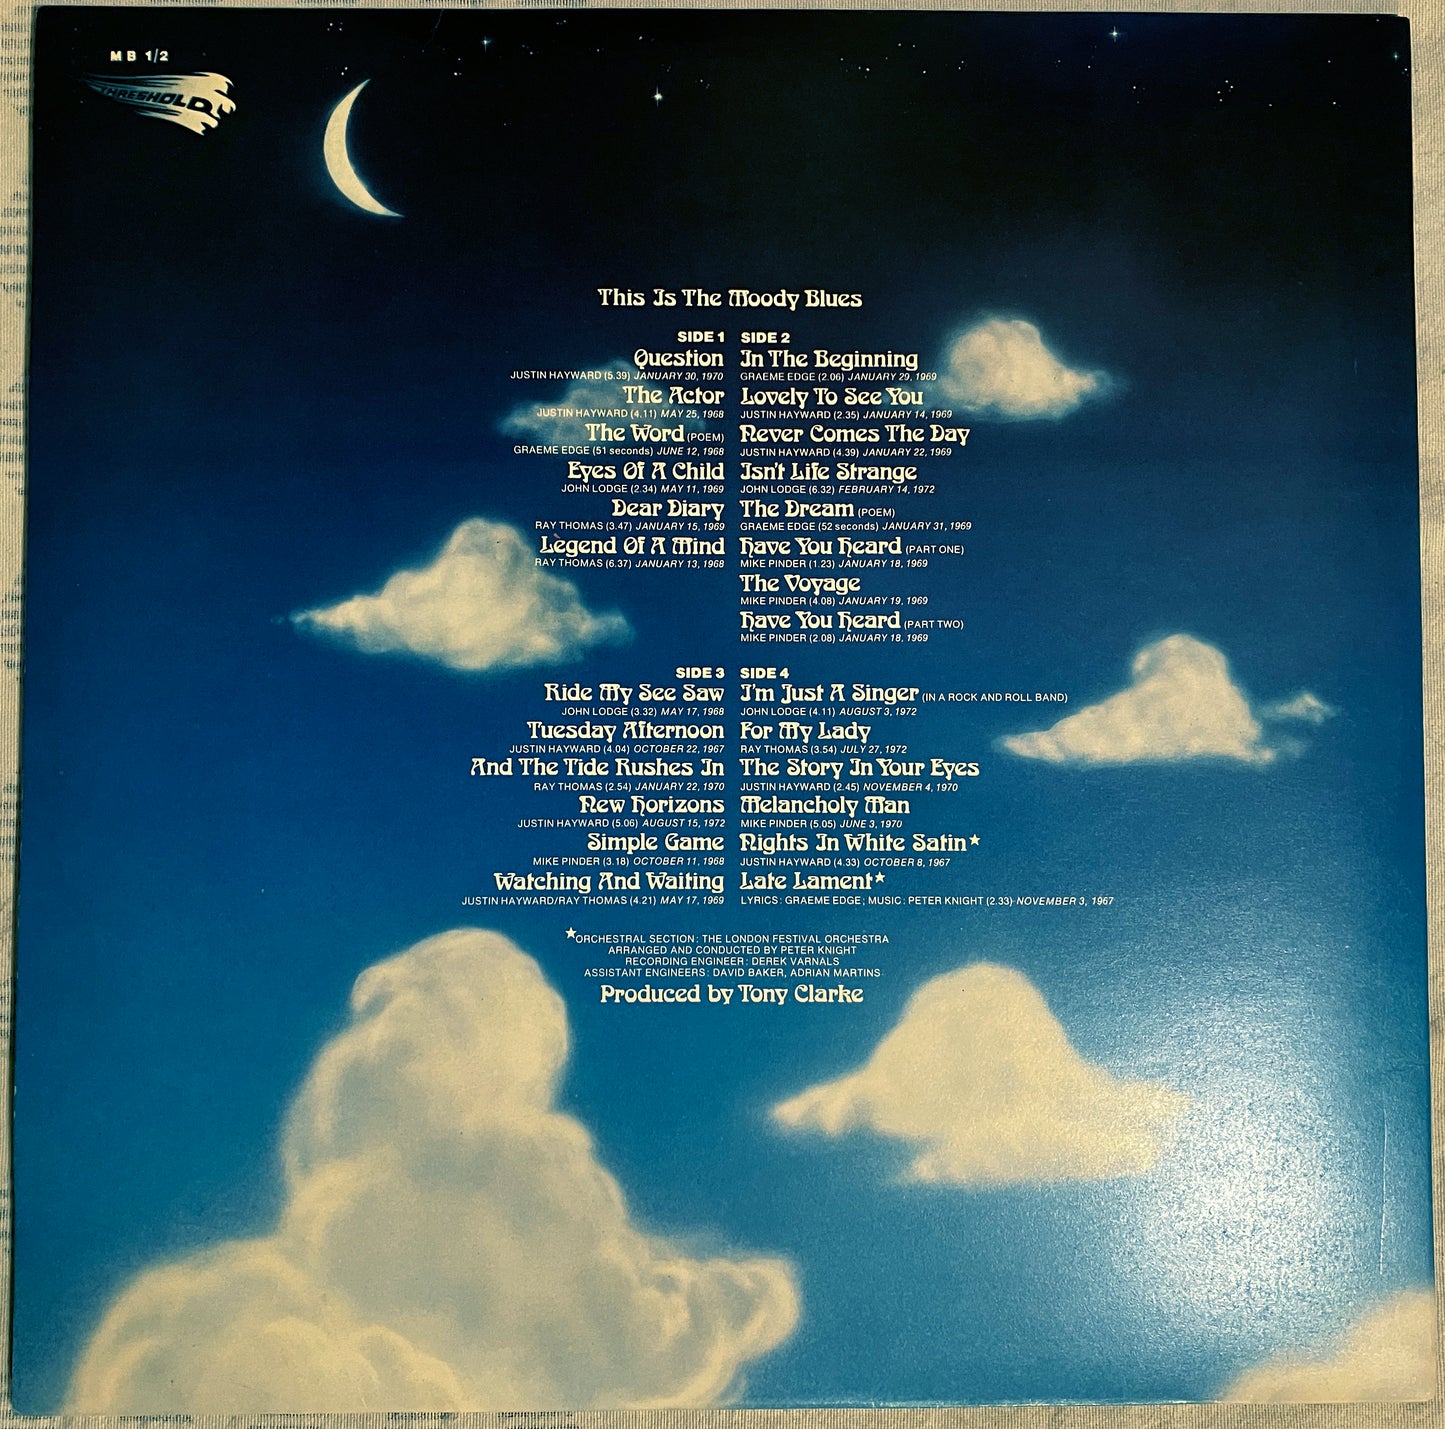 The Moody Blues - This Is The Moody Blues, UK1974, EX/EX